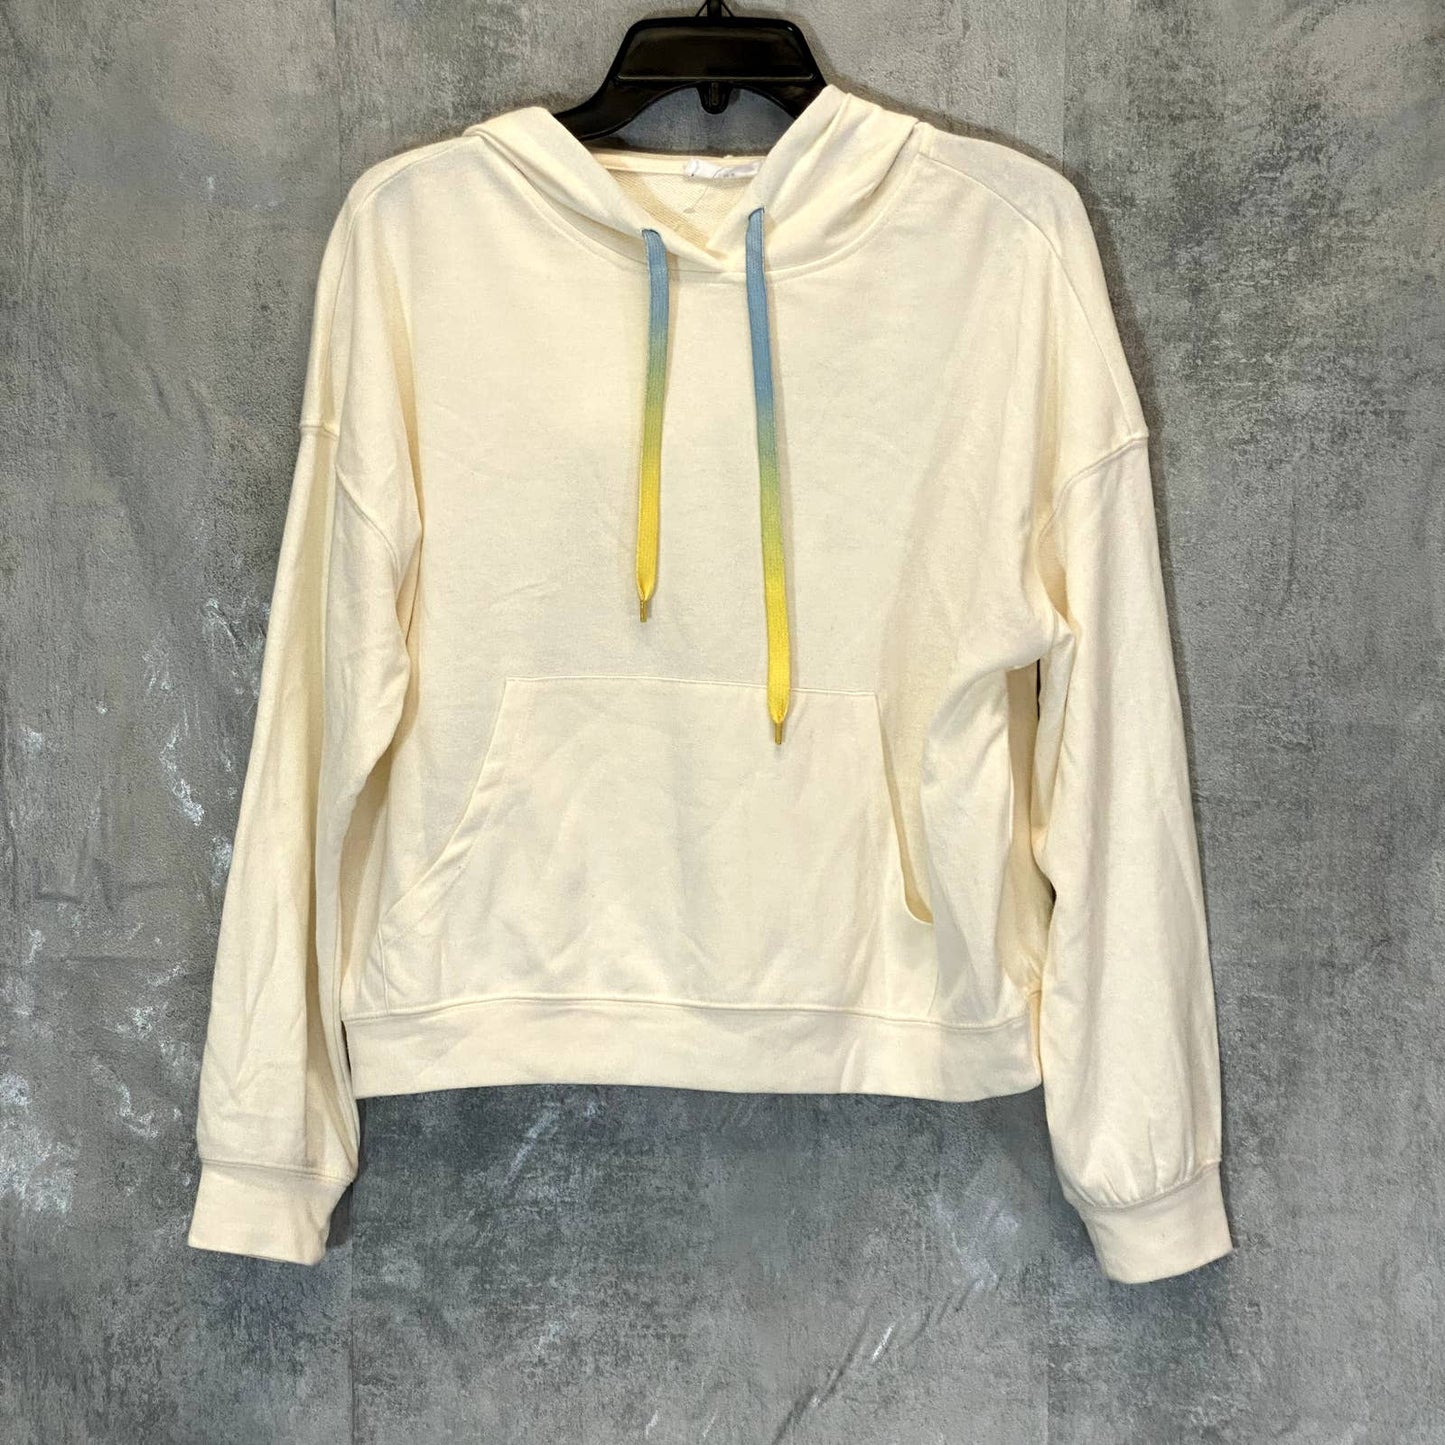 ELODIE Women's Off White Ombre Drawstring Pullover Hoodie SZ M